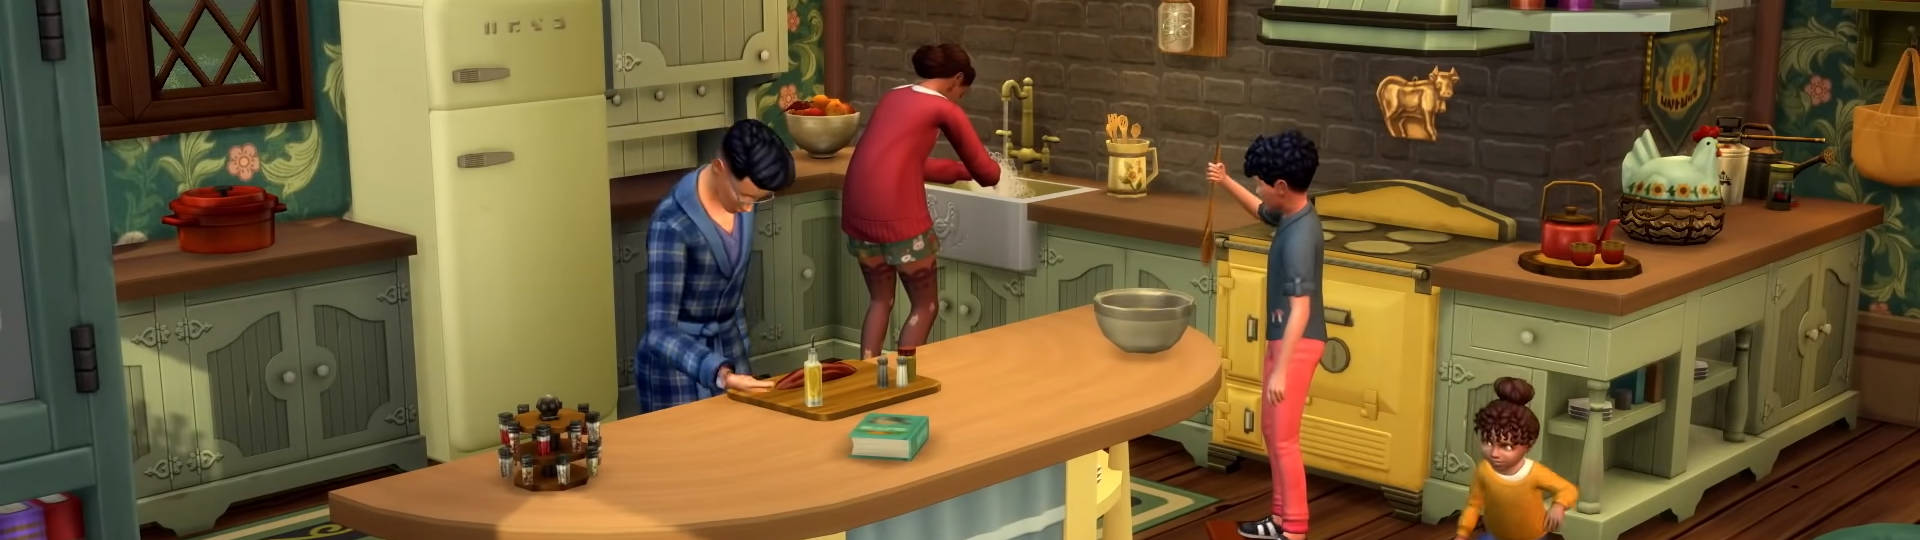 The Sims 4 Update 1.77.131.1030 slice